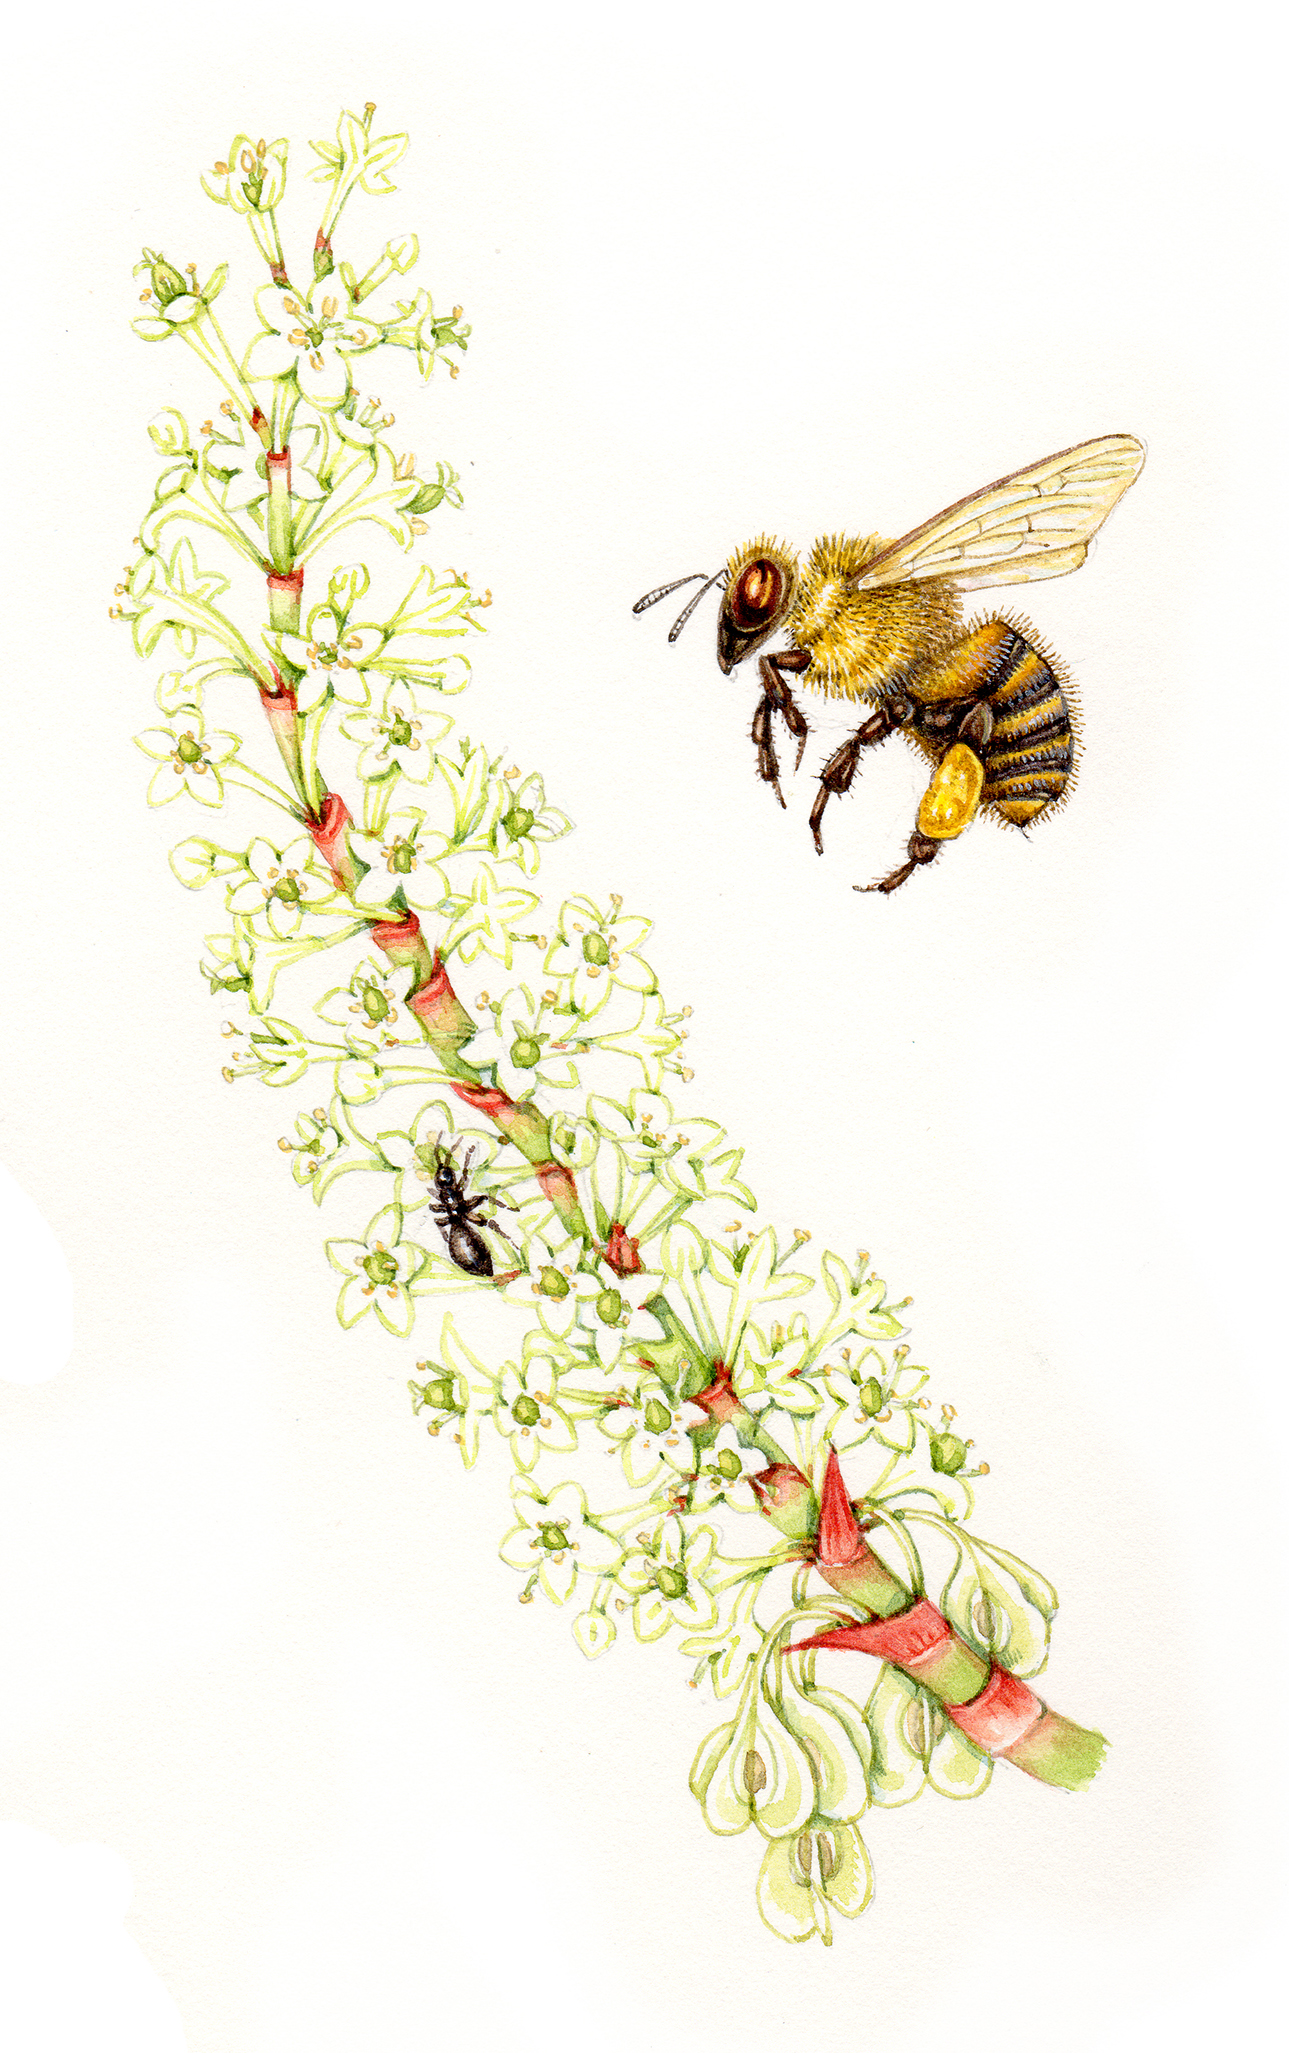 Illustrating a Bumble bee - Lizzie Harper